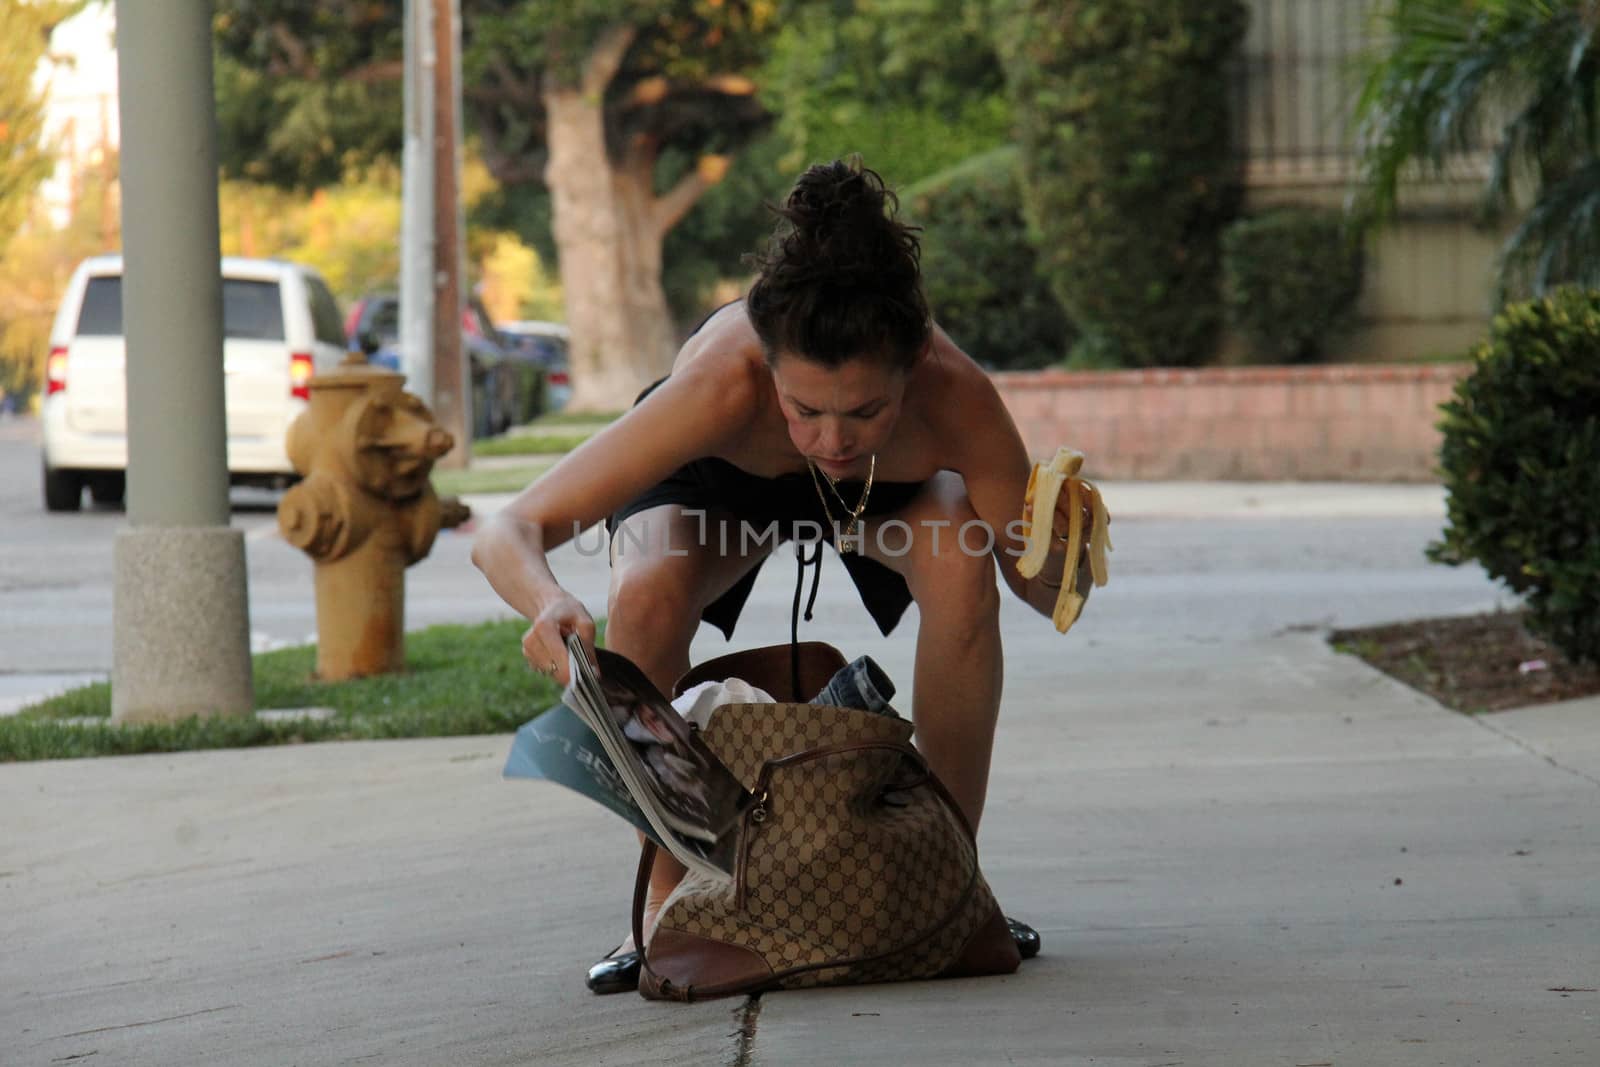 Alicia Arden
star of "Hoarding: Buried Alive," has both a purse malfunction and a wardrobe malfunction while leaving yoga class, Woodland Hills, CA 09-23-15/ImageCollect by ImageCollect